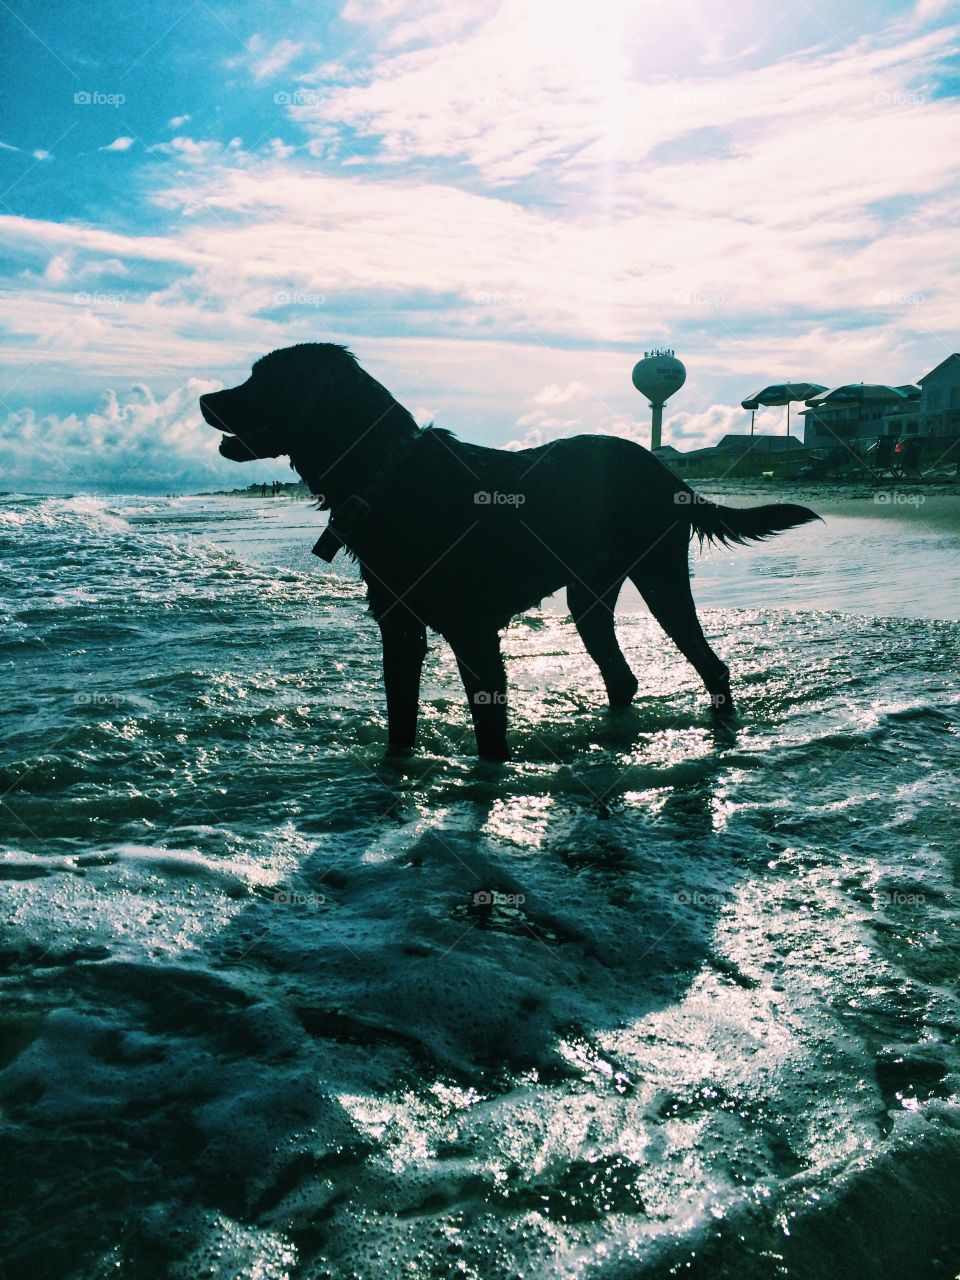 Our black lab loves swimming in Emerald Isle 